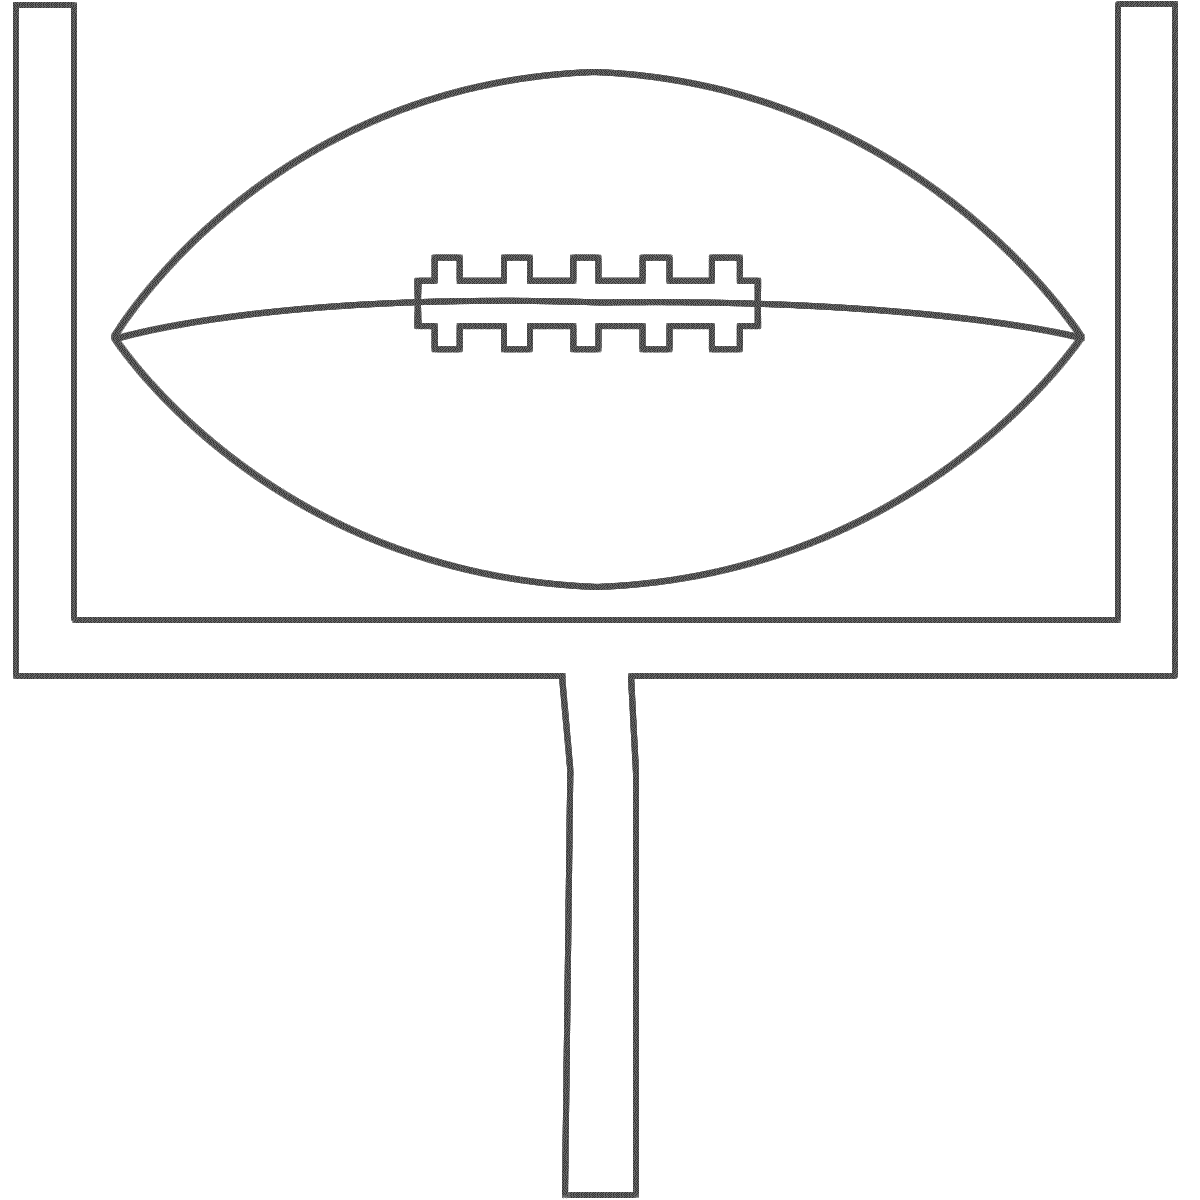 Football on a goal post - Coloring Page (Sports)